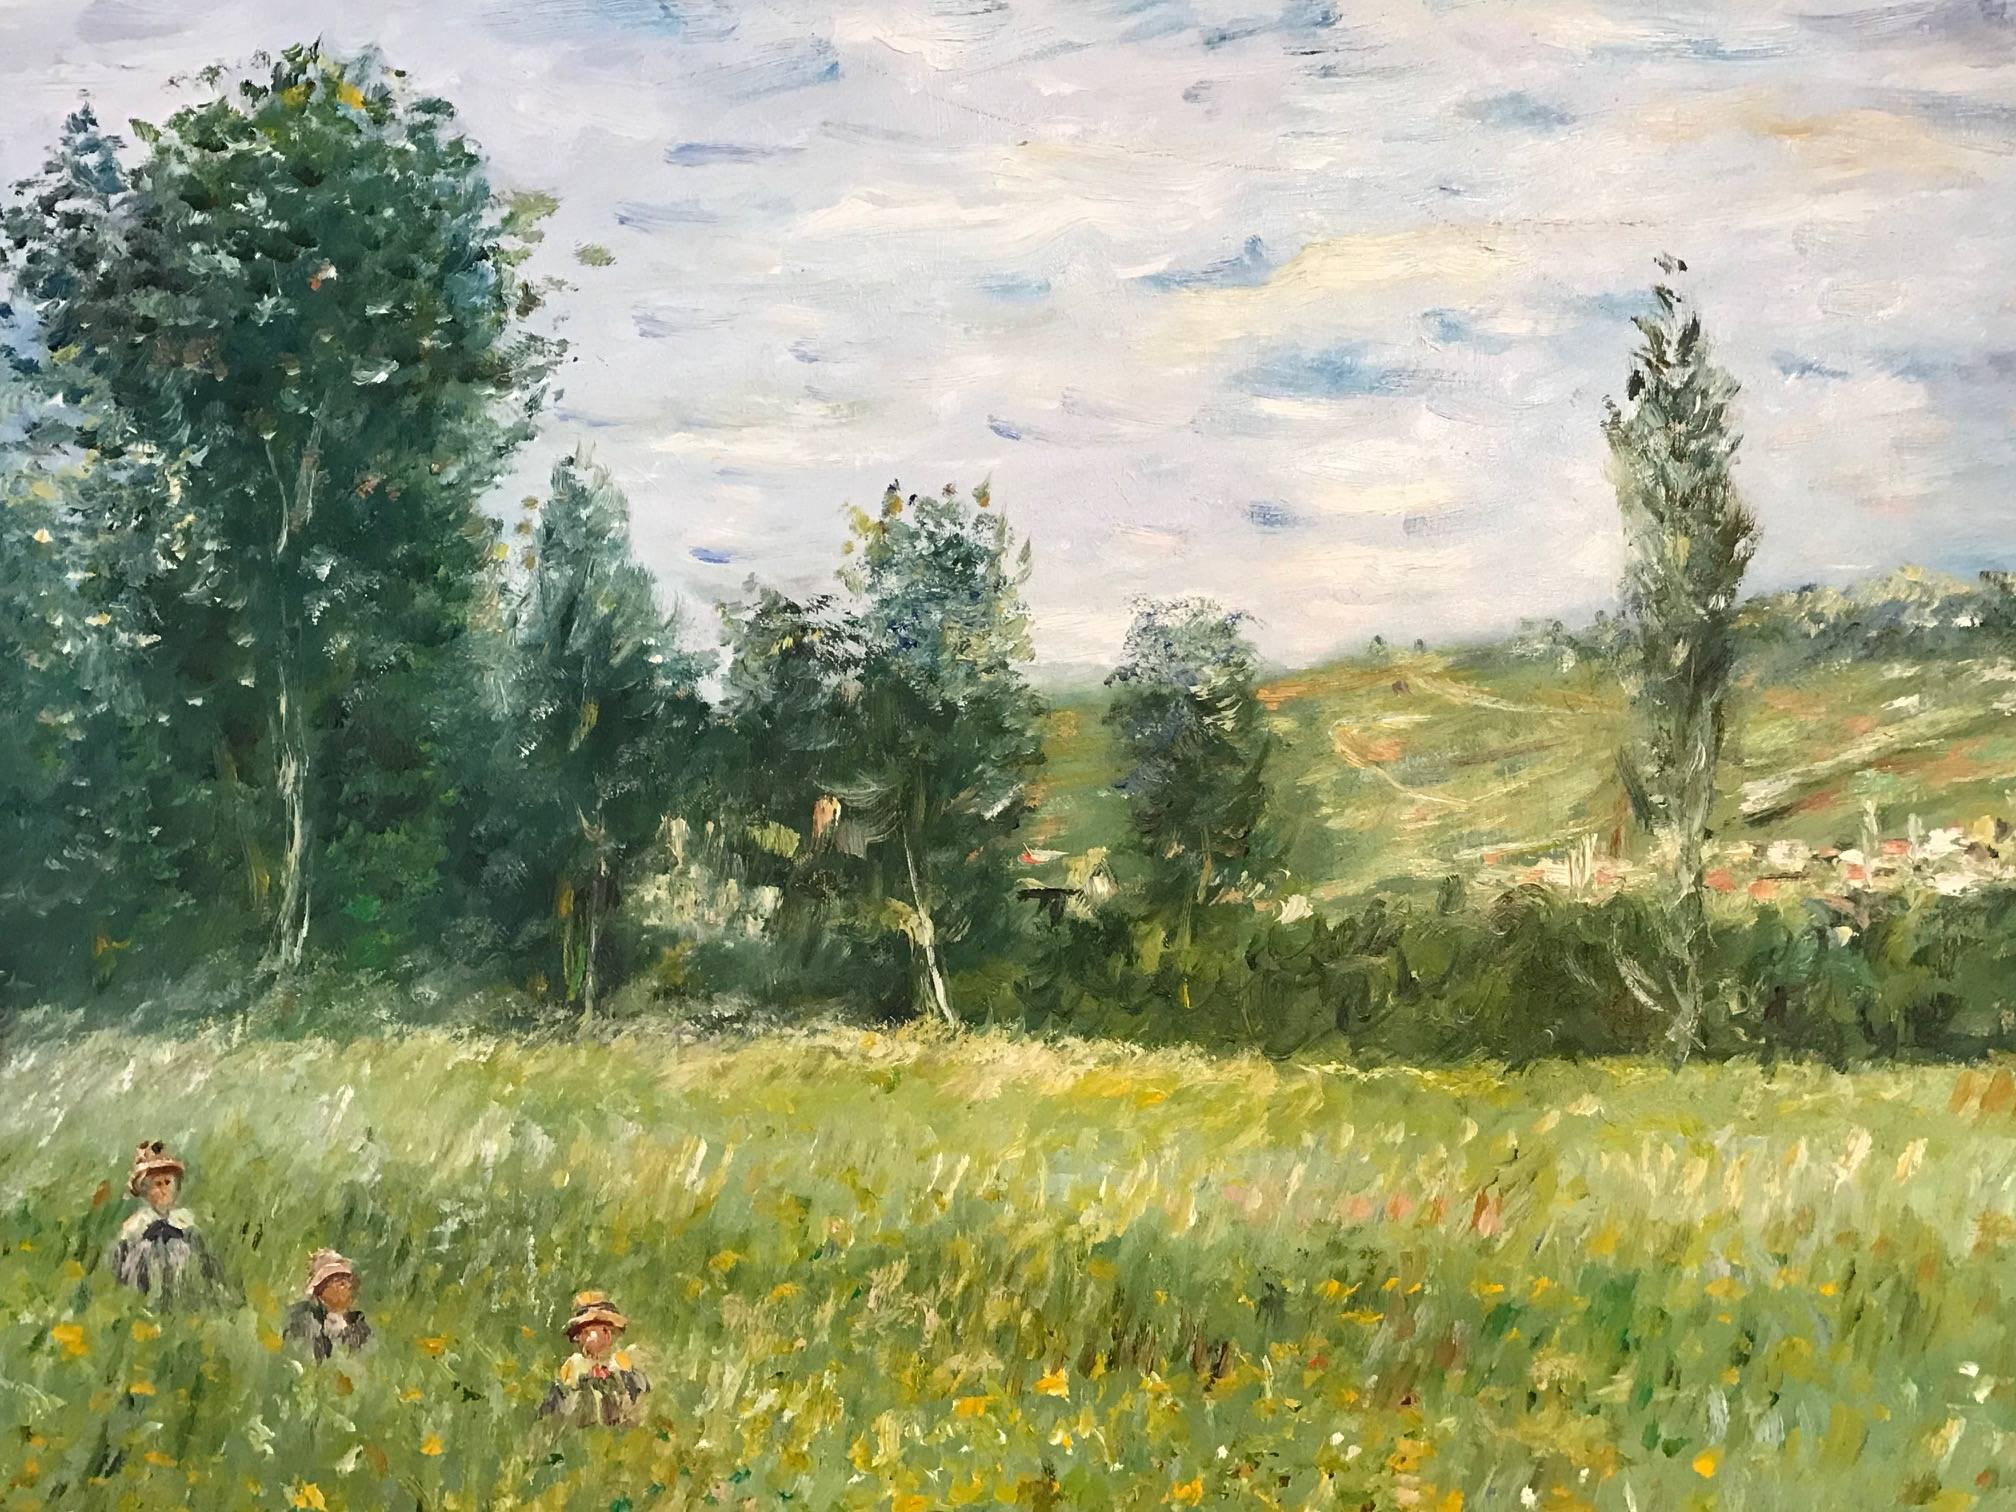 Beautiful oil painting on canvas depicting figures walking through long grass and wild flower meadows. The work is after the earlier work by Claude Monet (Vetheuile, 1879). The painting bears his name to the lower left corner. 

The painting is